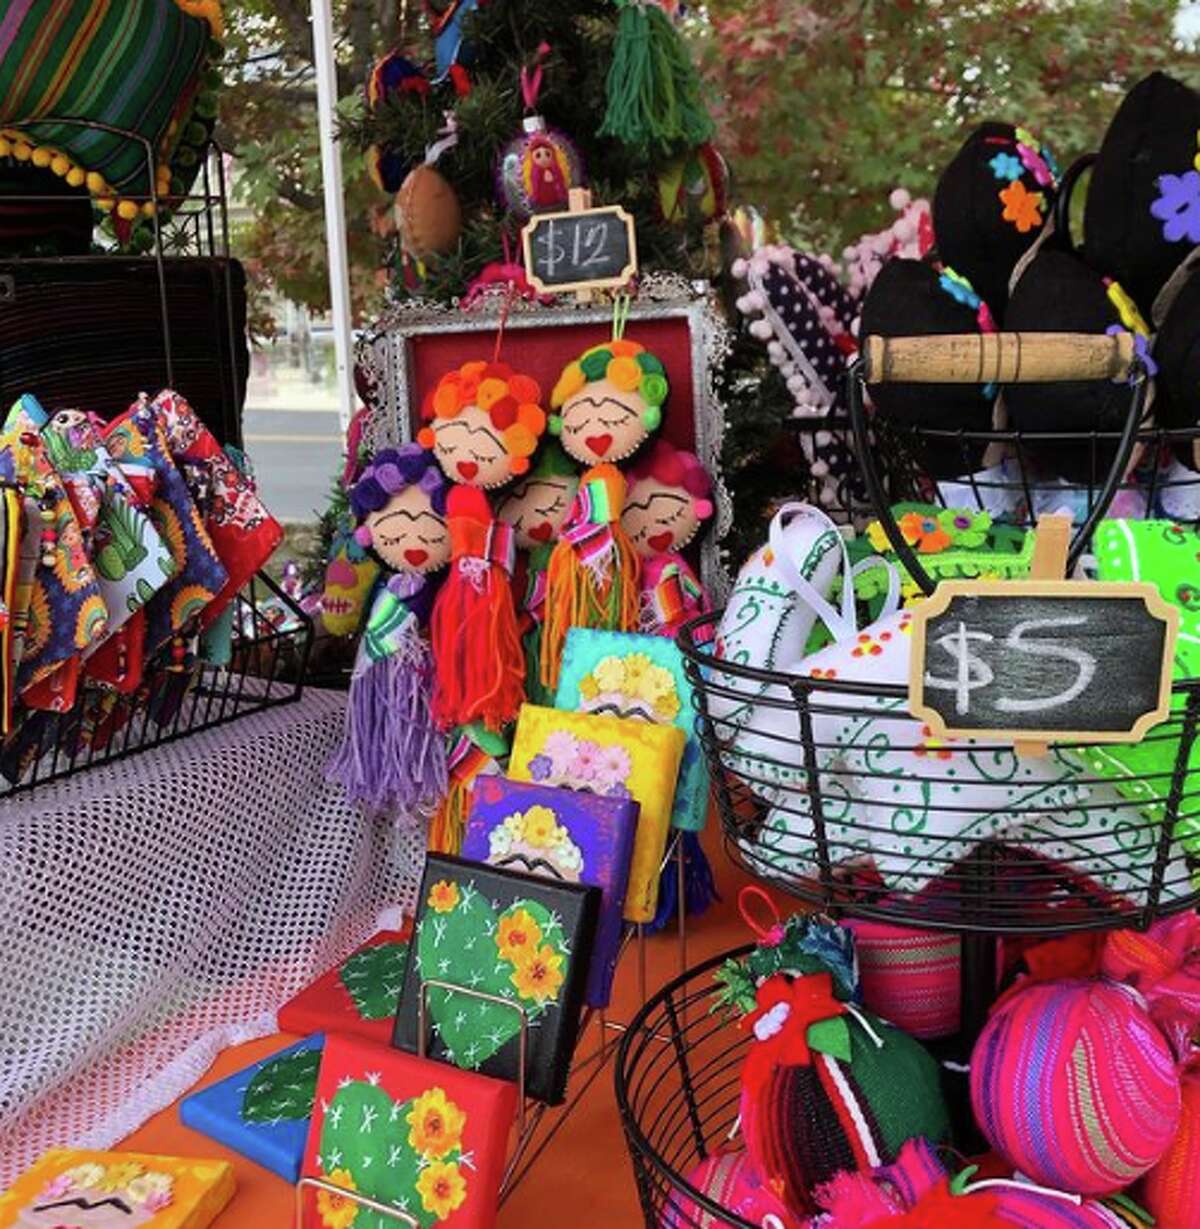 Many vendors feel that markets are integral to San Antonio's culture.